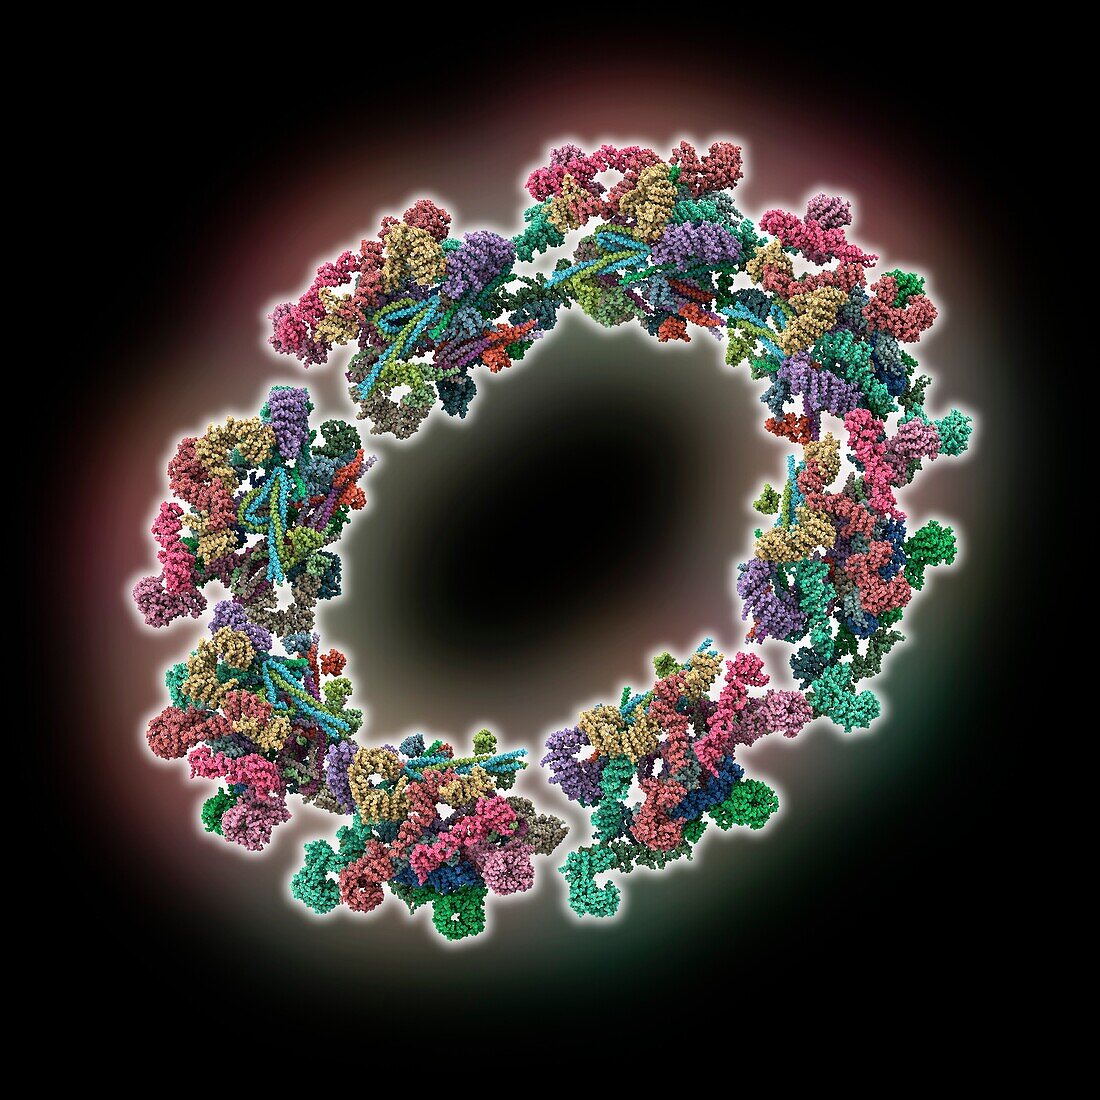 Inner ring of the human nuclear pore, molecular model